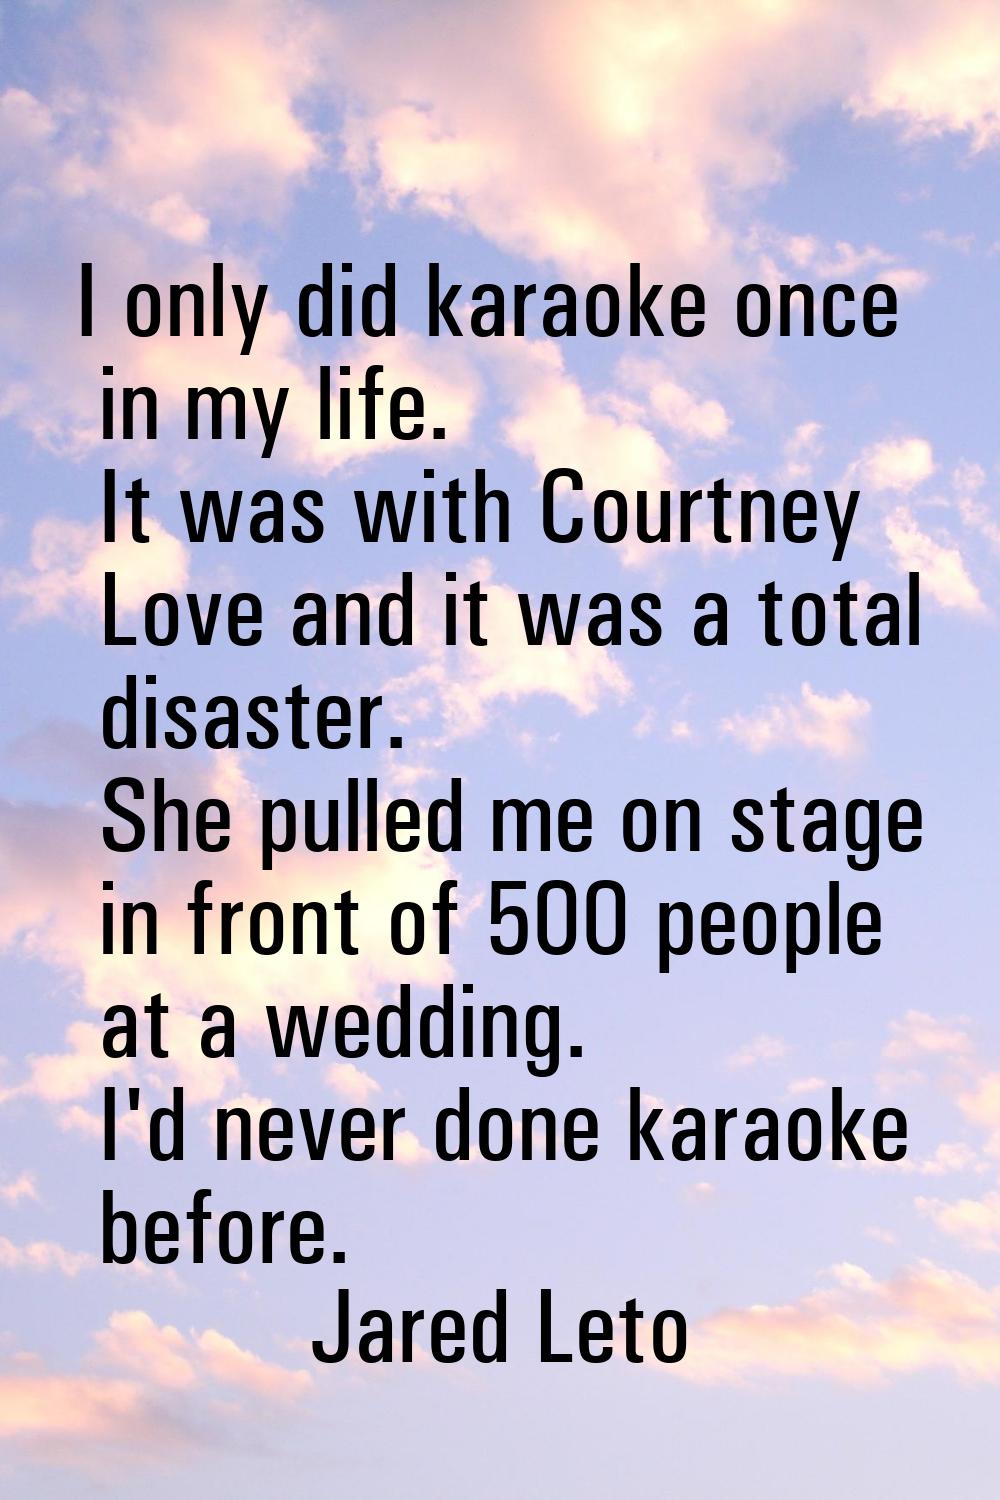 I only did karaoke once in my life. It was with Courtney Love and it was a total disaster. She pull